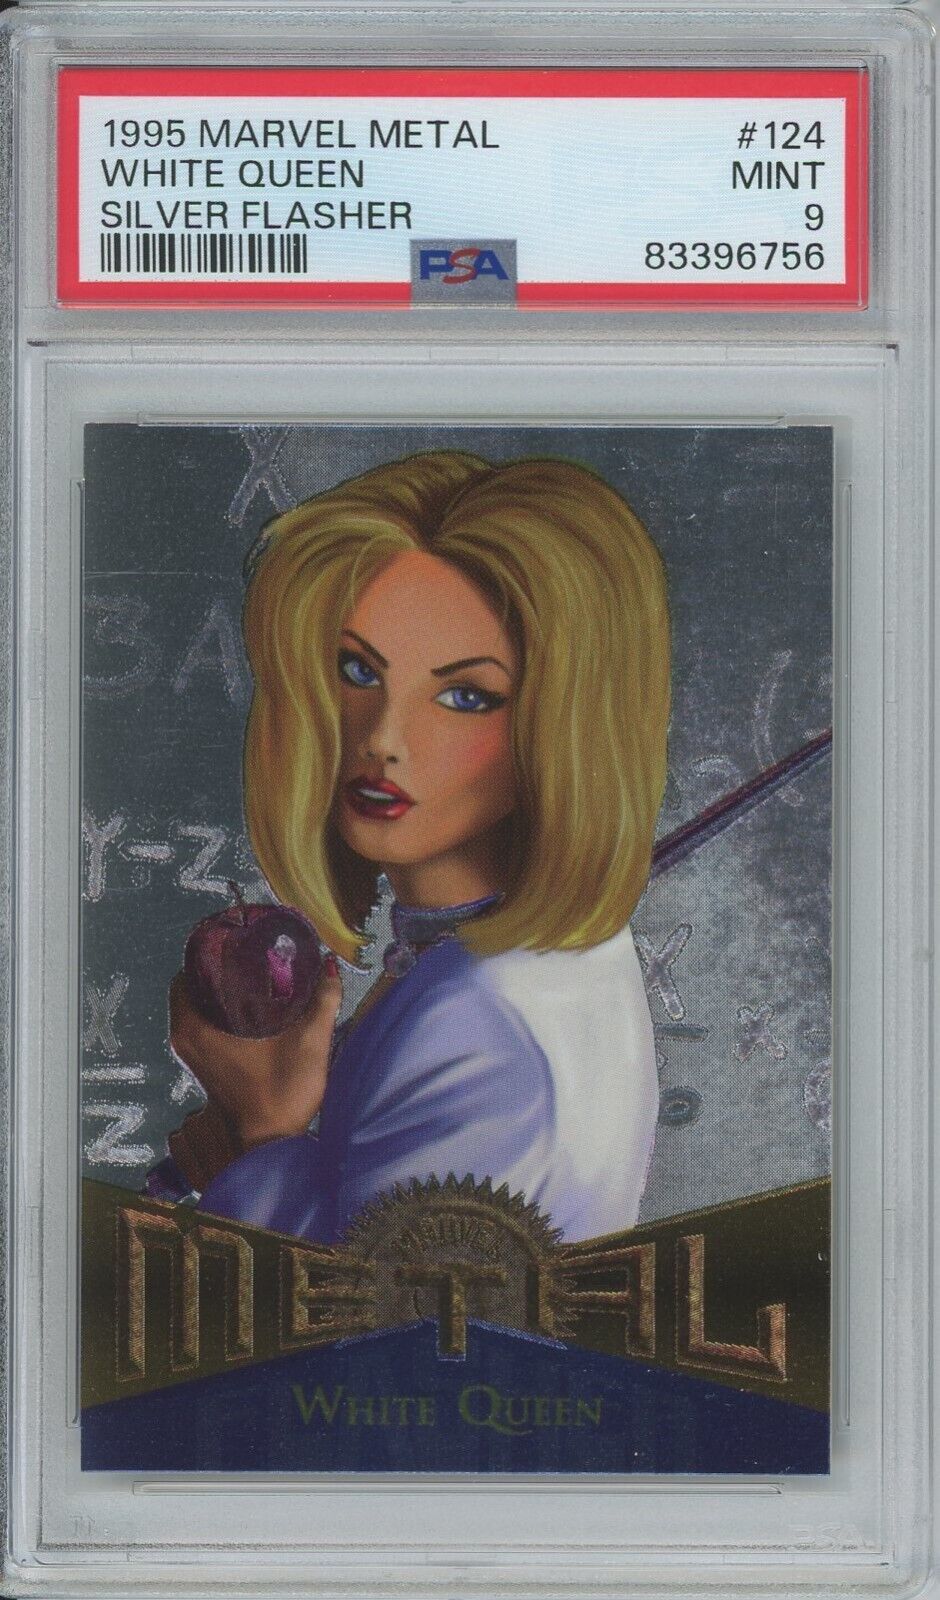 White Queen 1995 Marvel Metal #124 SILVER FLASHER - PSA 9 MINT - very nice